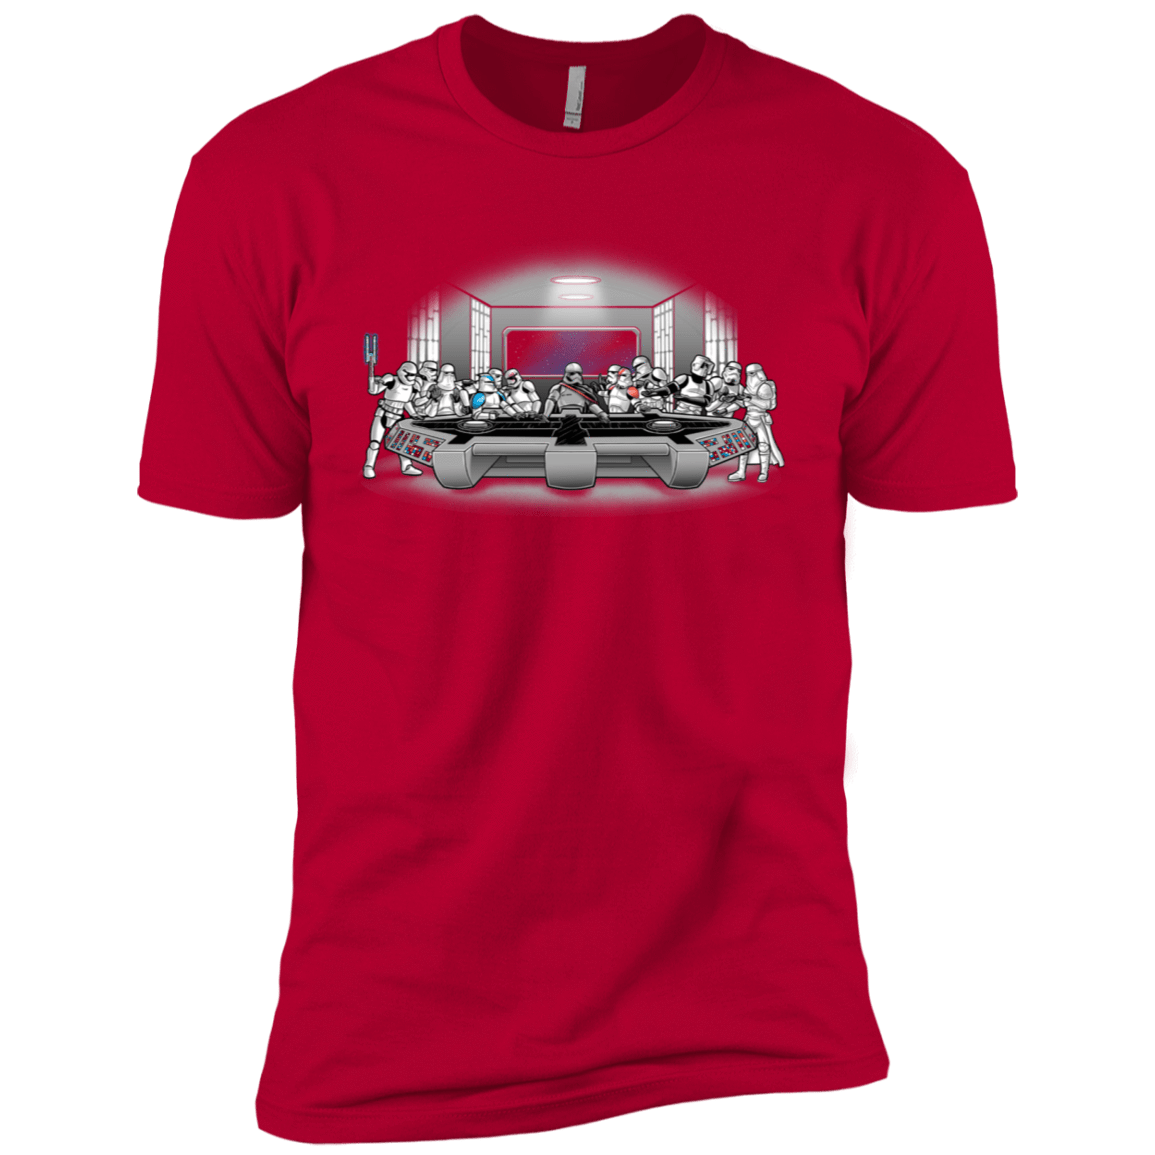 T-Shirts Red / X-Small Troopers Dinner Men's Premium T-Shirt